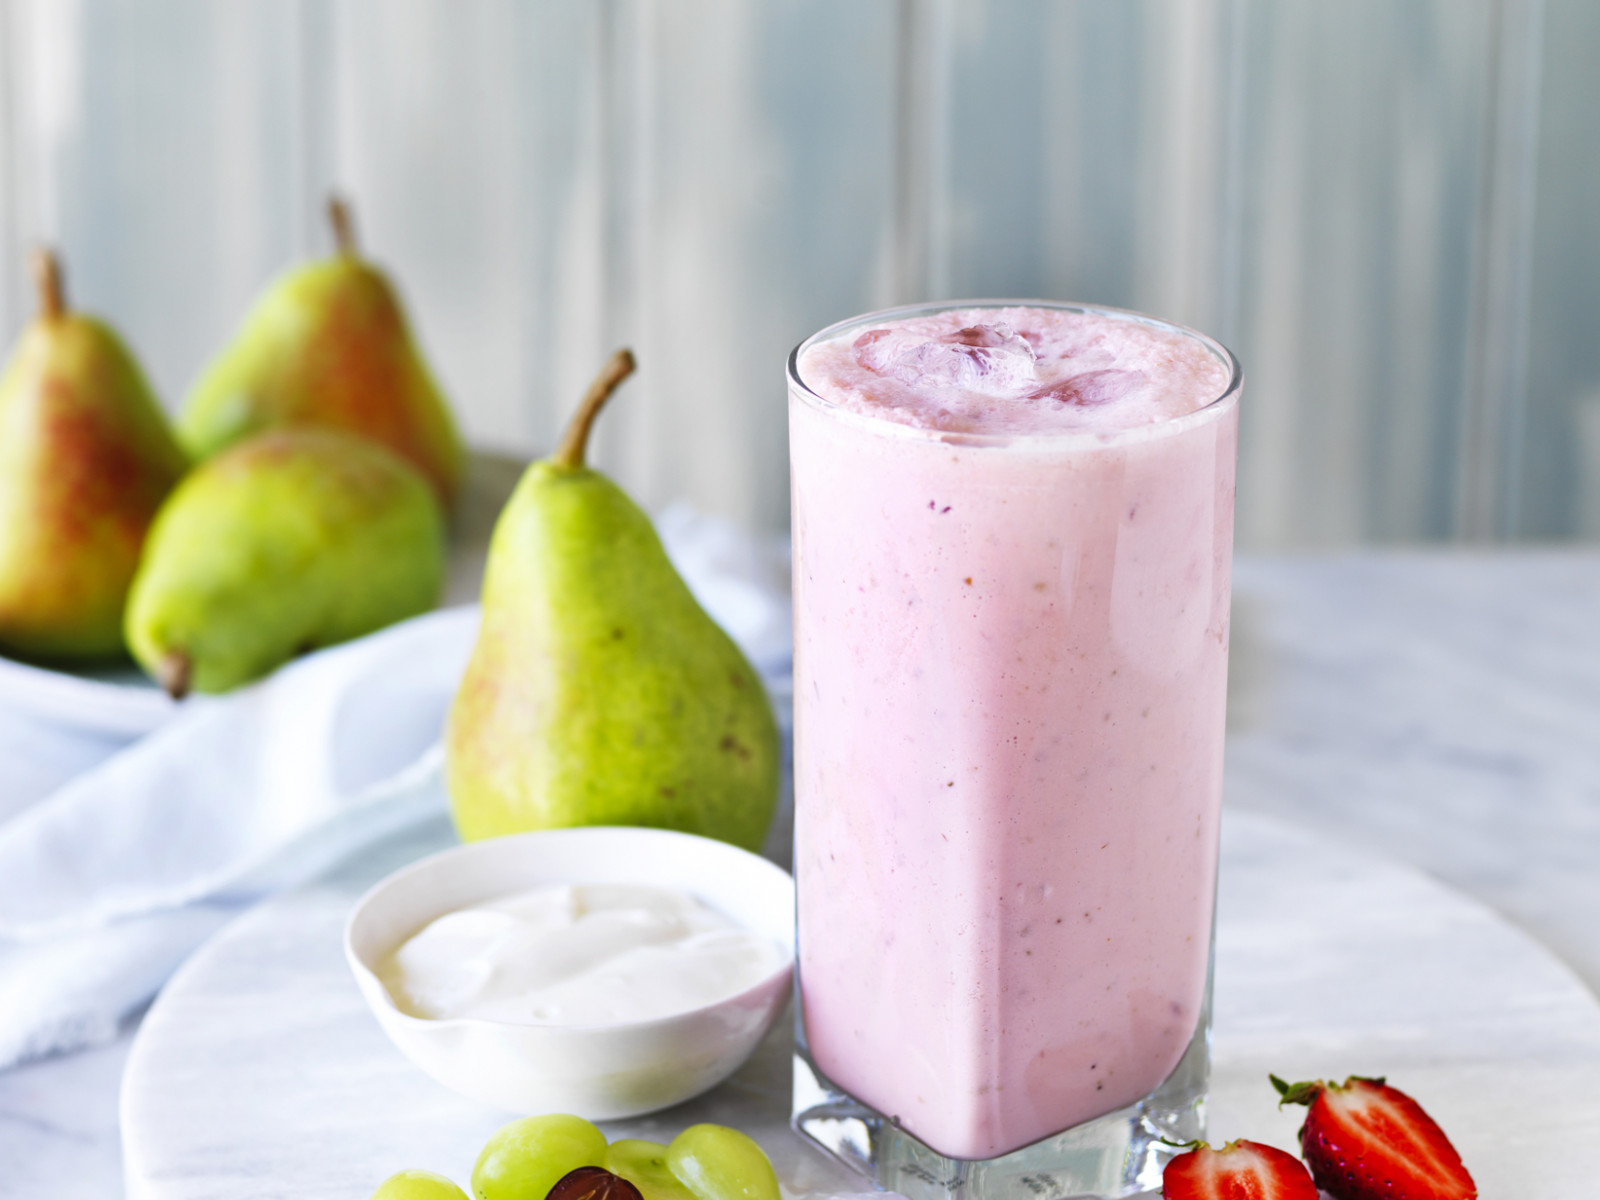 Pear and Strawberry Smoothie Recipe | myfoodbook